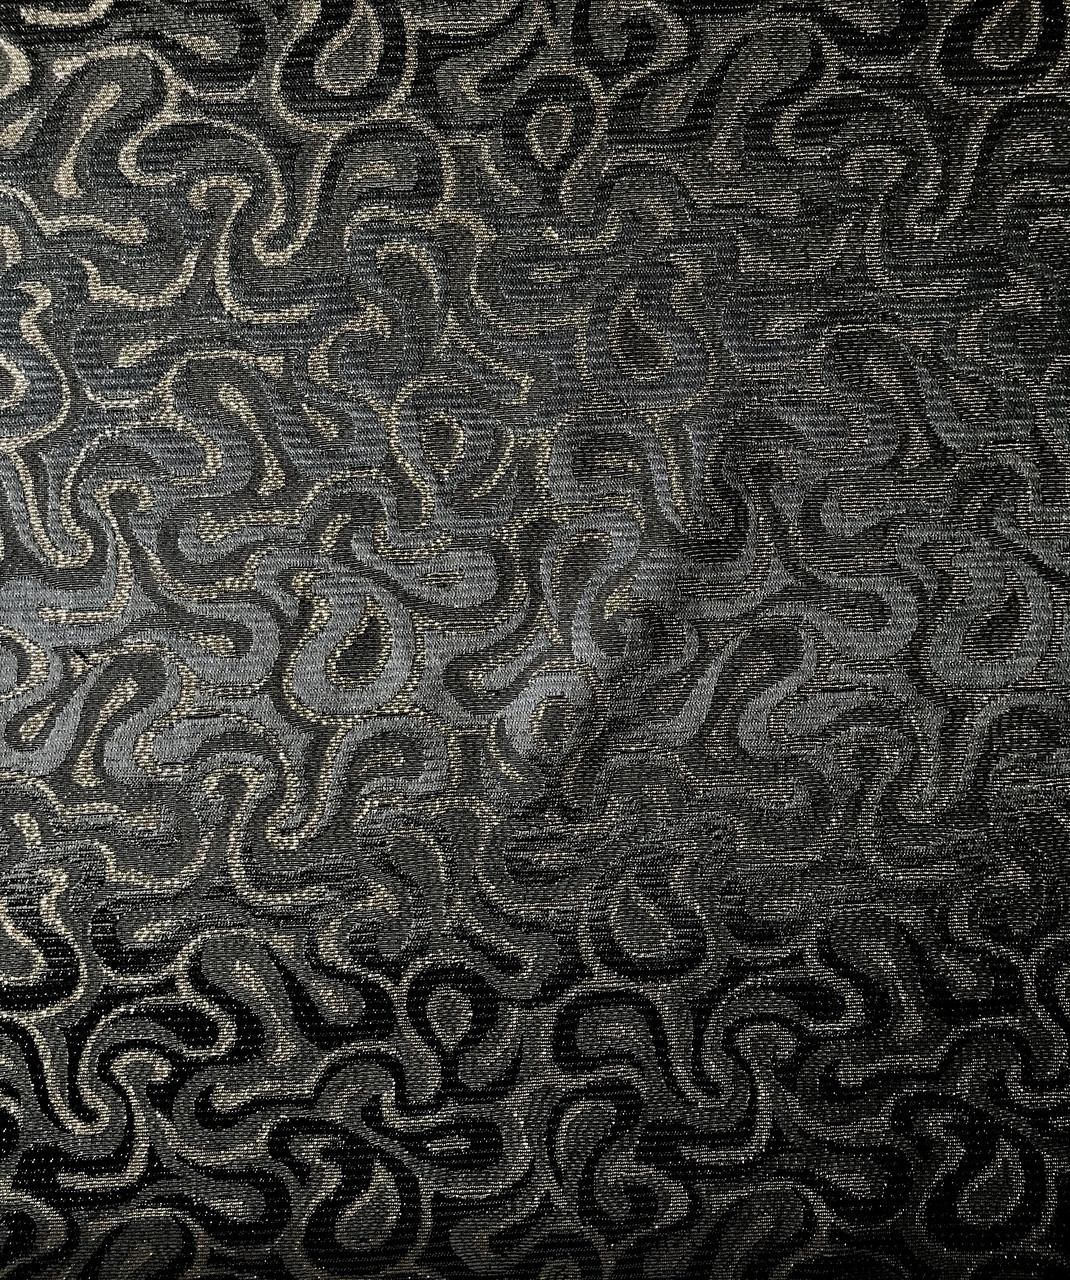 Brocade seabed, black and gold